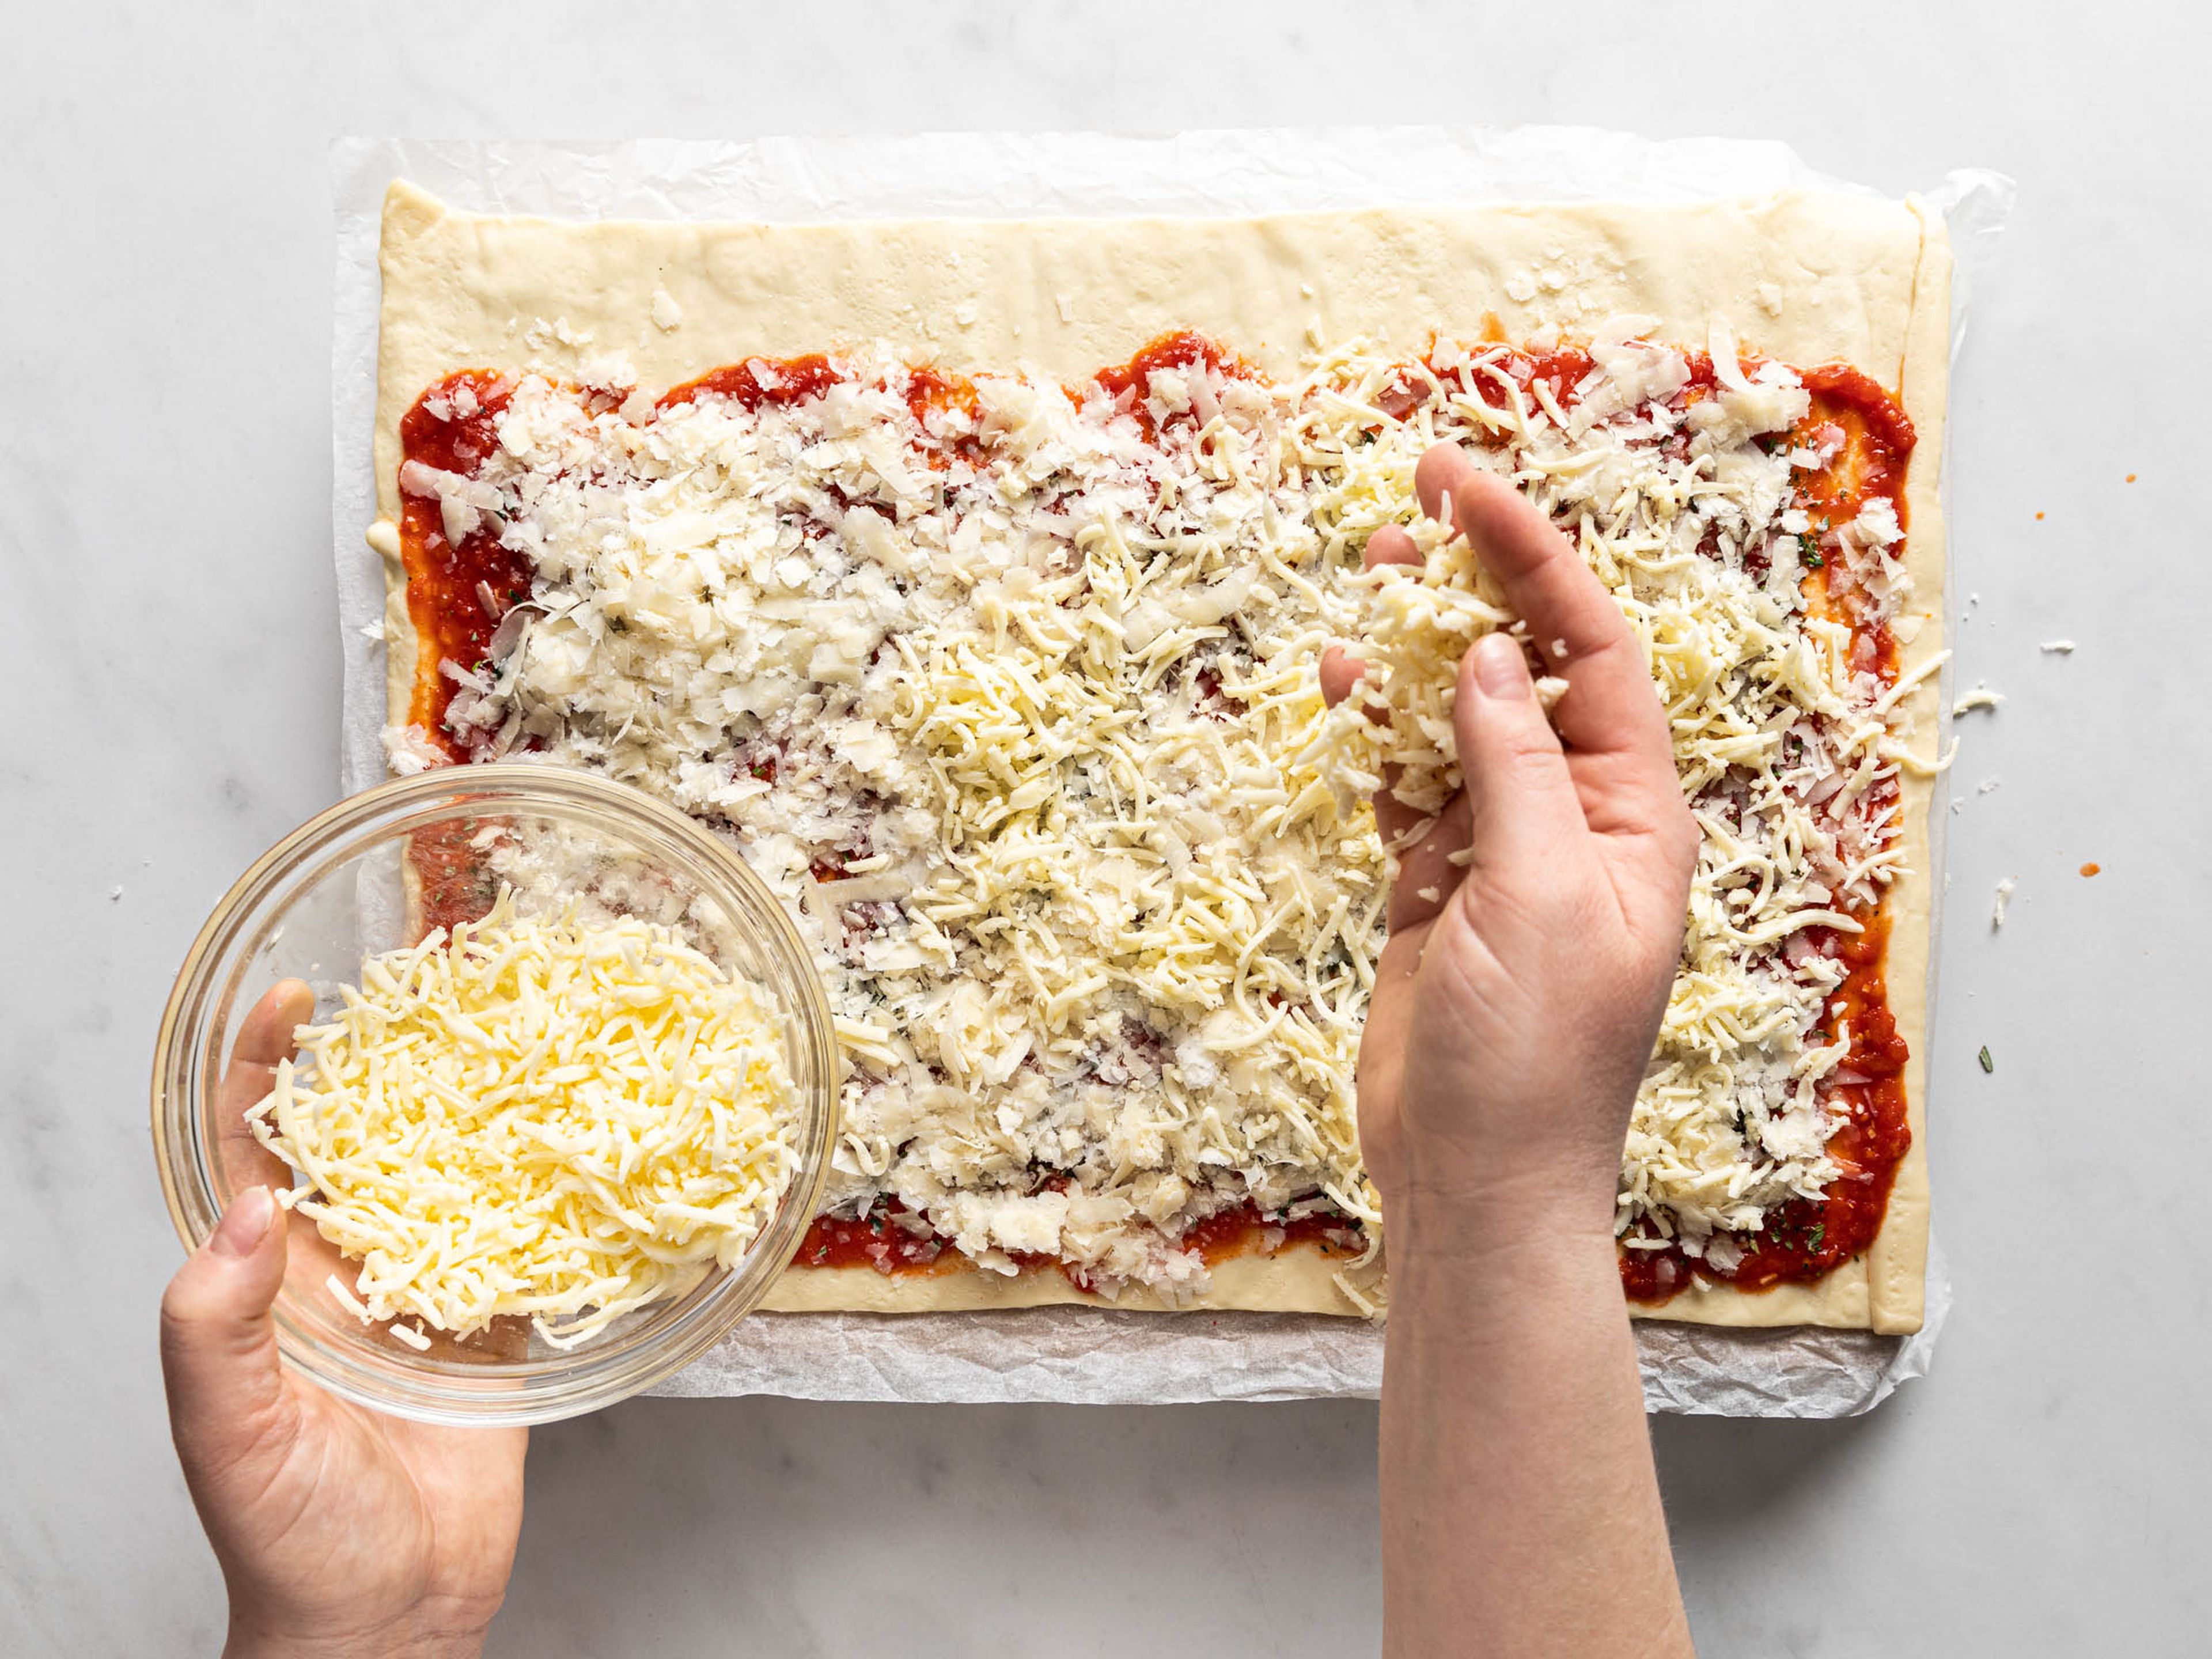 Preheat the oven to 220°C/430°F. Roll out pizza dough and spread approx. one-third of the sauce over the dough. Sprinkle chili flakes, rosemary, and thyme, or our PIZZA PARTY seasoning (if using) on top, then add Parmesan and mozzarella cheese. Roll up the dough and slice into even rolls.